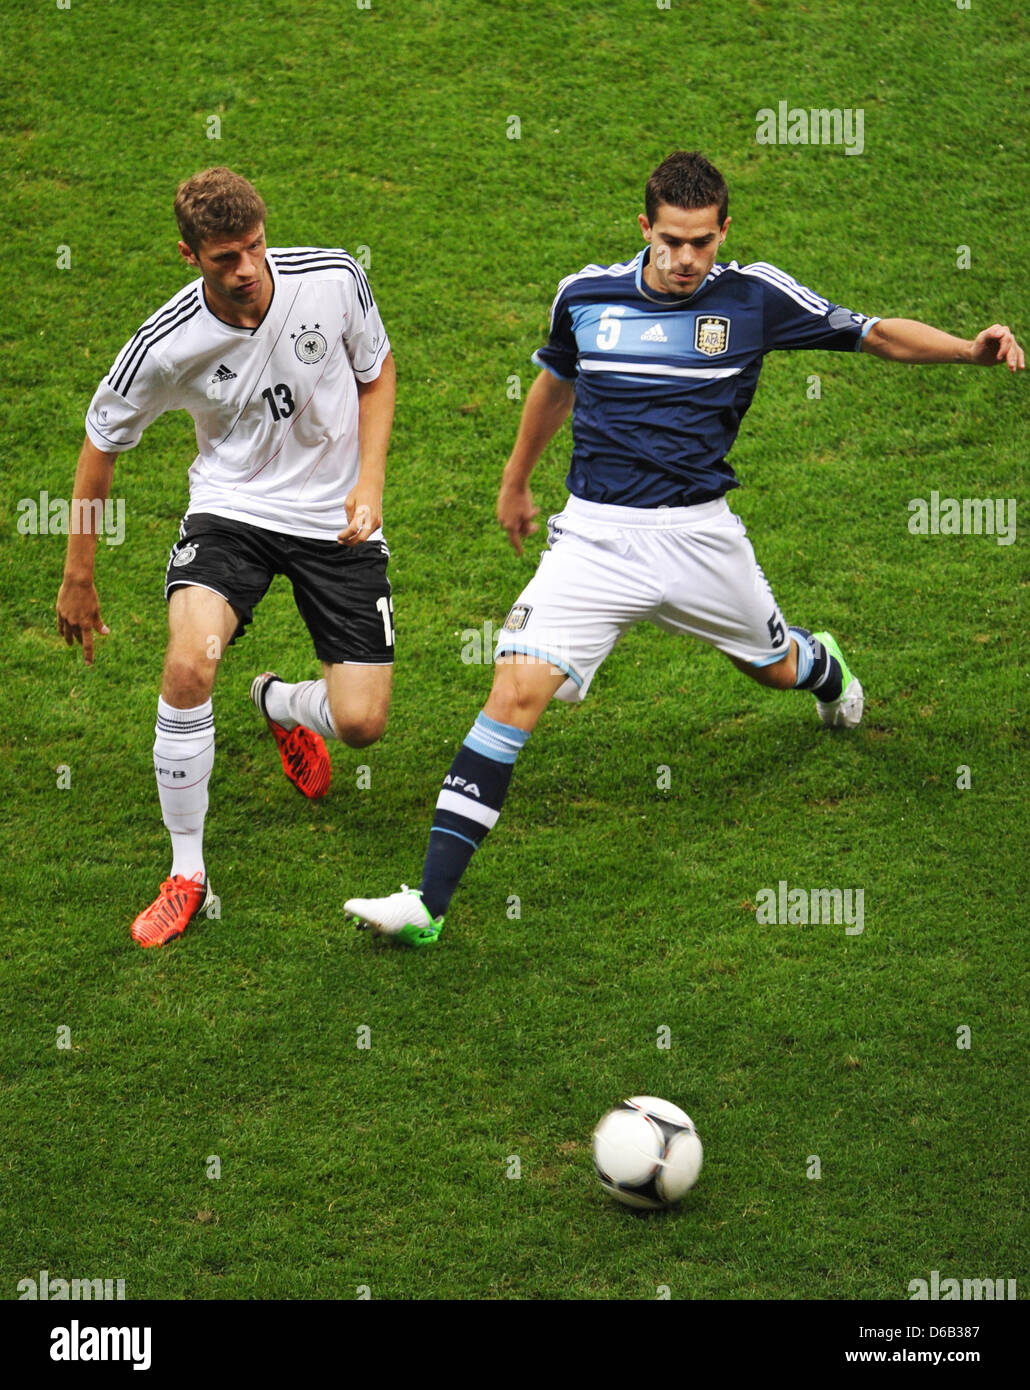 Argentina's Fernando Gago (R) vies for the ball with Germany's Thomas Mueller during the friendly soccer match between Germany and Argentina at the Commerzbank-Arena in Frankfurt/Main, Germany, 15 August 2012. Photo: Frank Kleefeldt Stock Photo